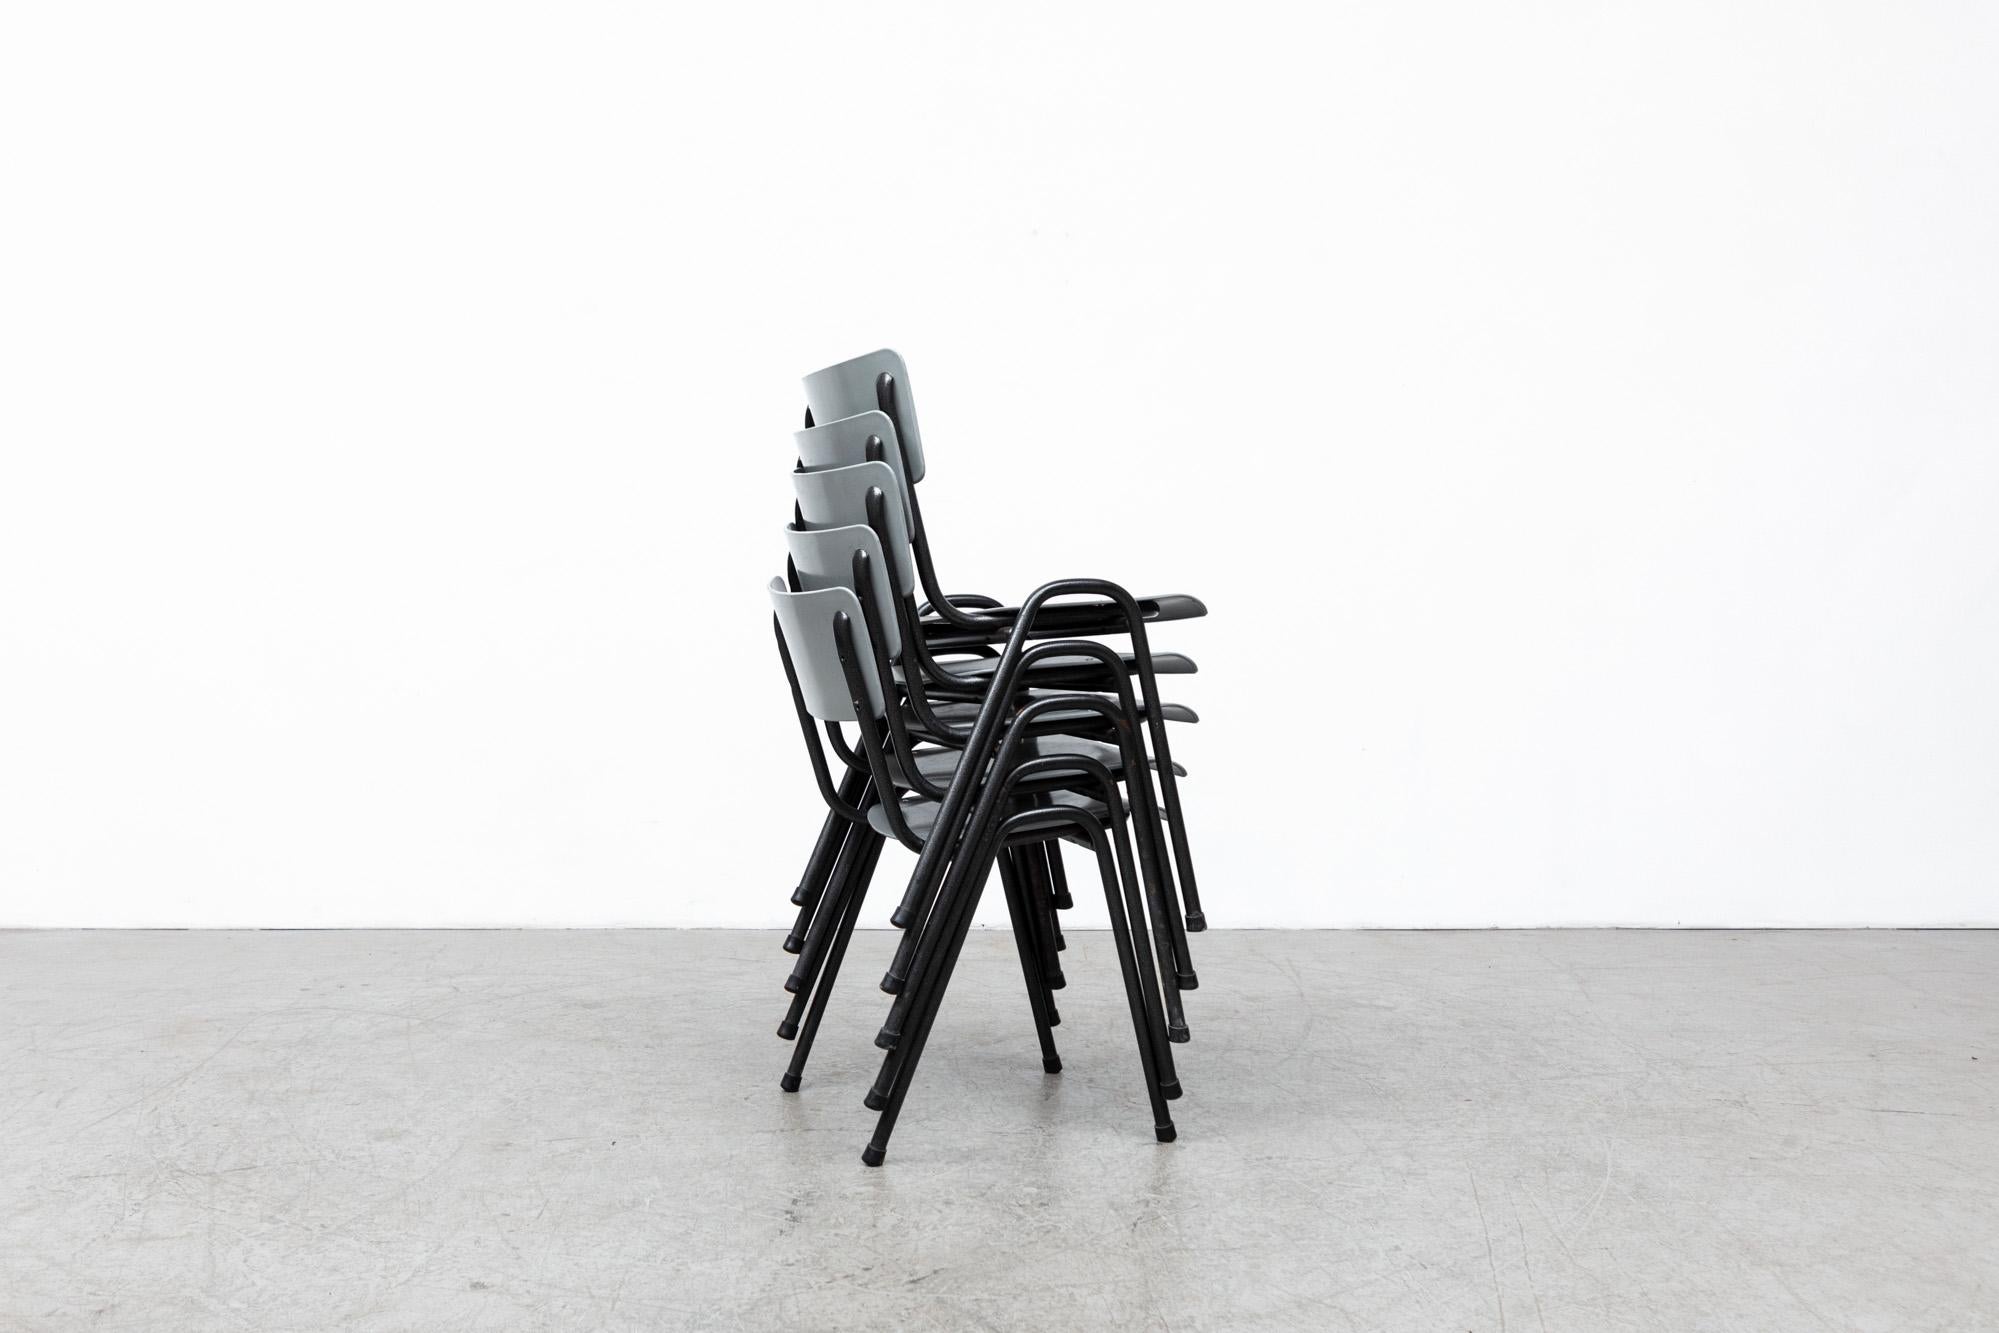 Mid-Century Stacking School or Restaurant Chairs with Grey Plastic Seating and Black Enameled Frame. In original condition with wear consistent with age and use. Listed individually.